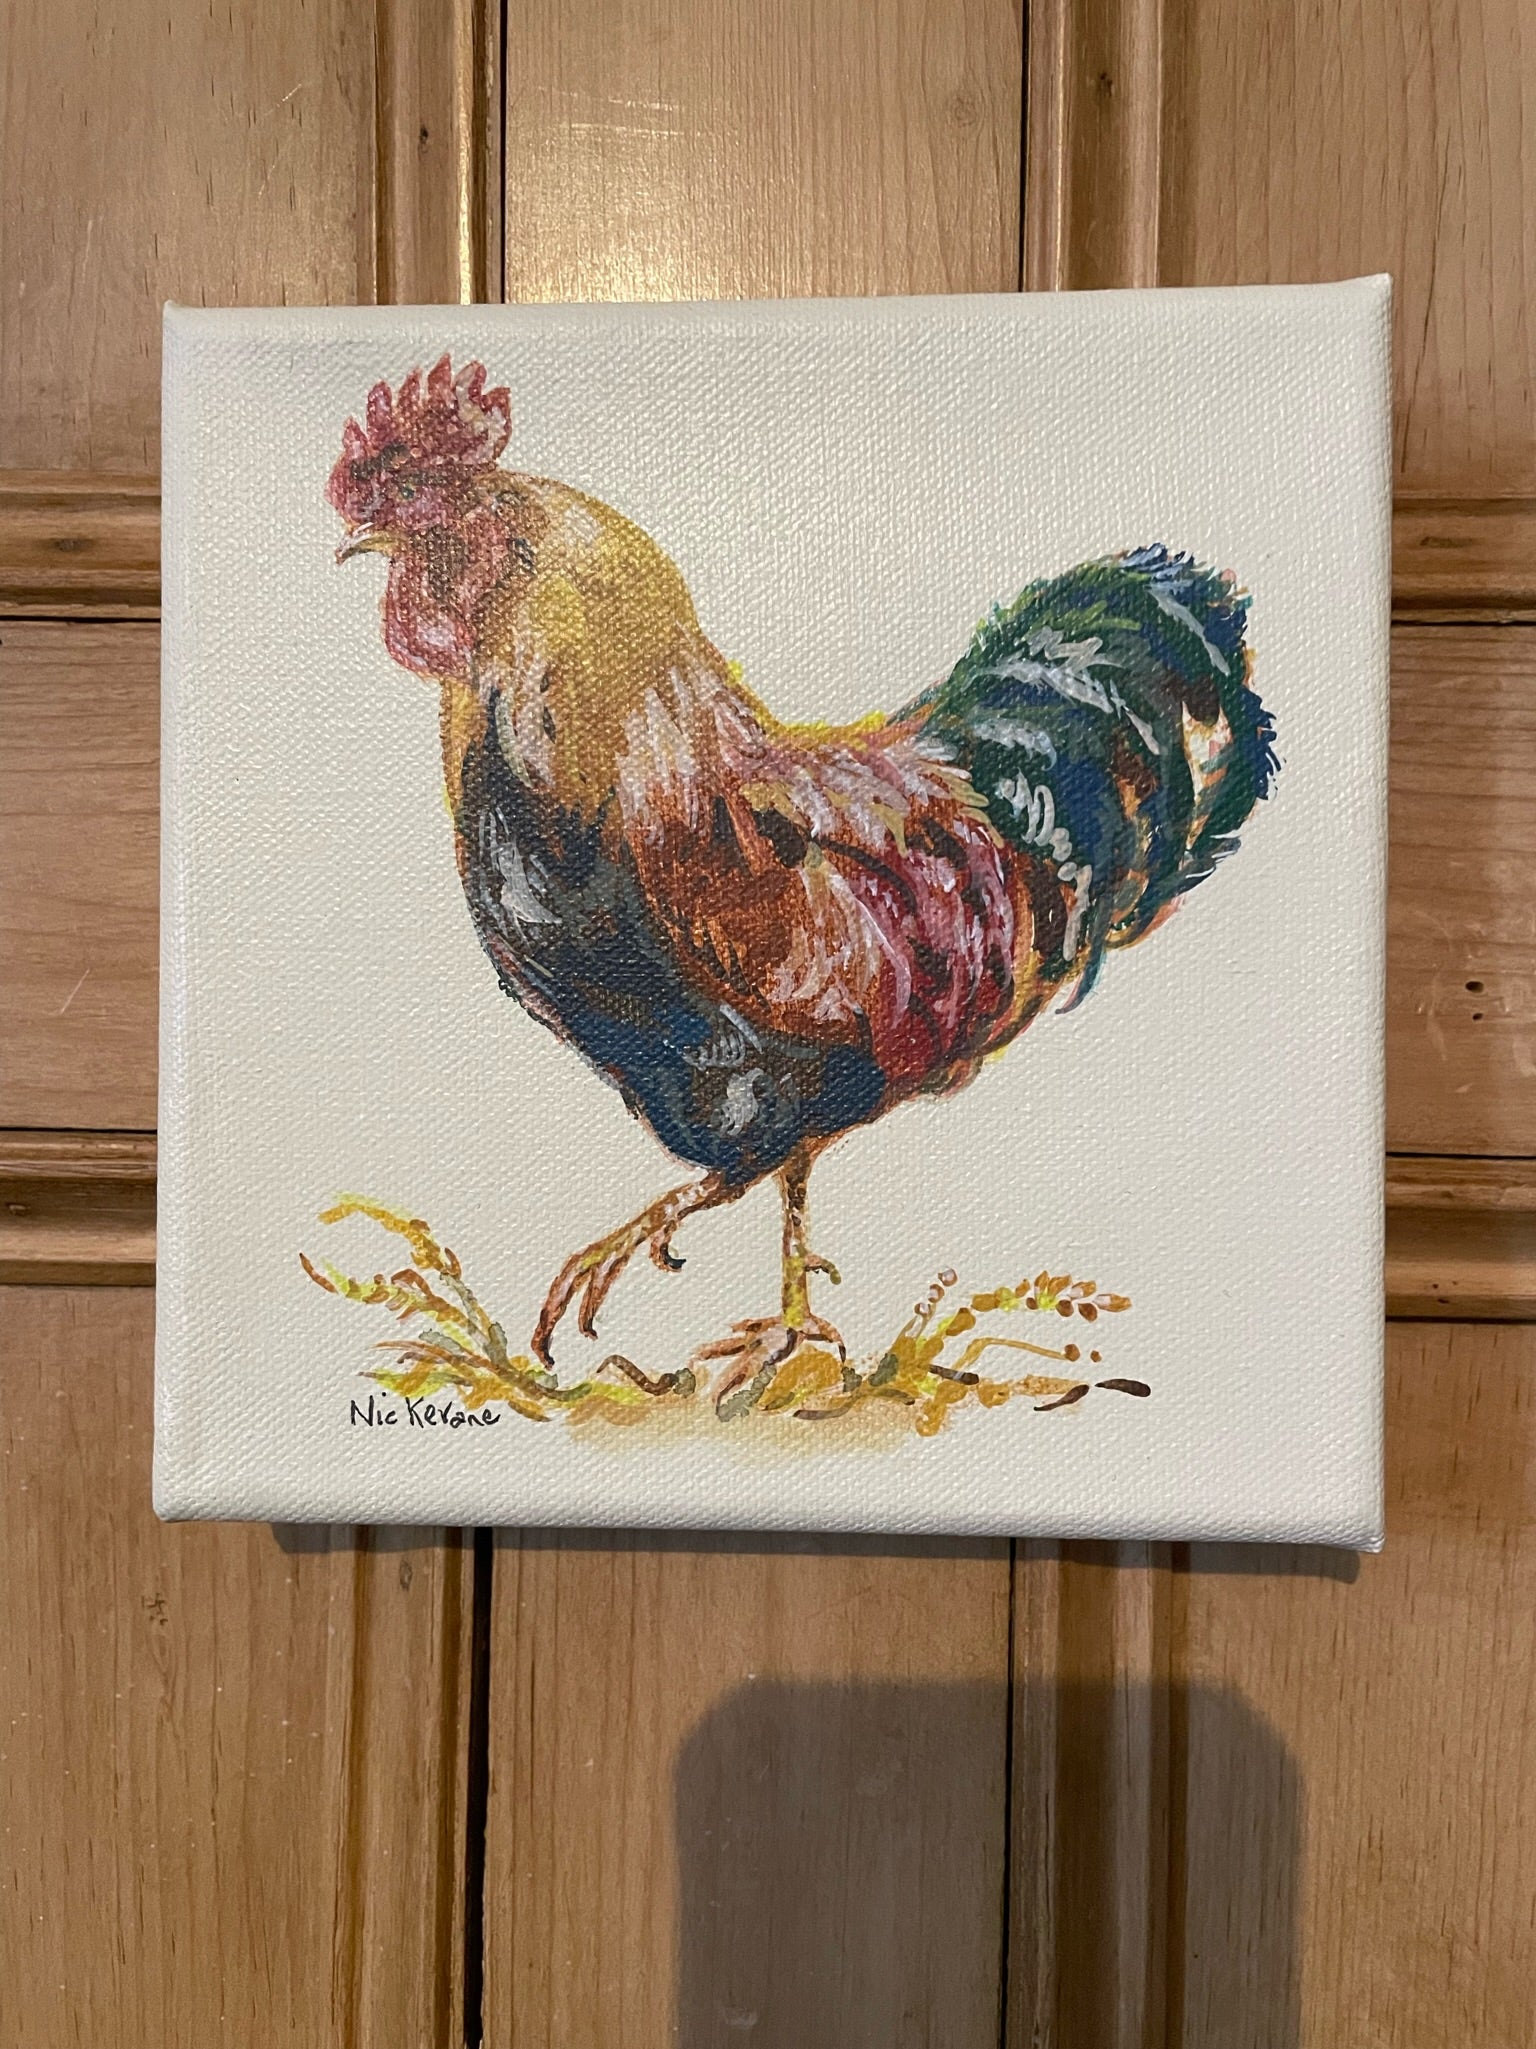 Strutting Cockerel - 15cm x 15cm mini paintings depicting various countryside subjects.